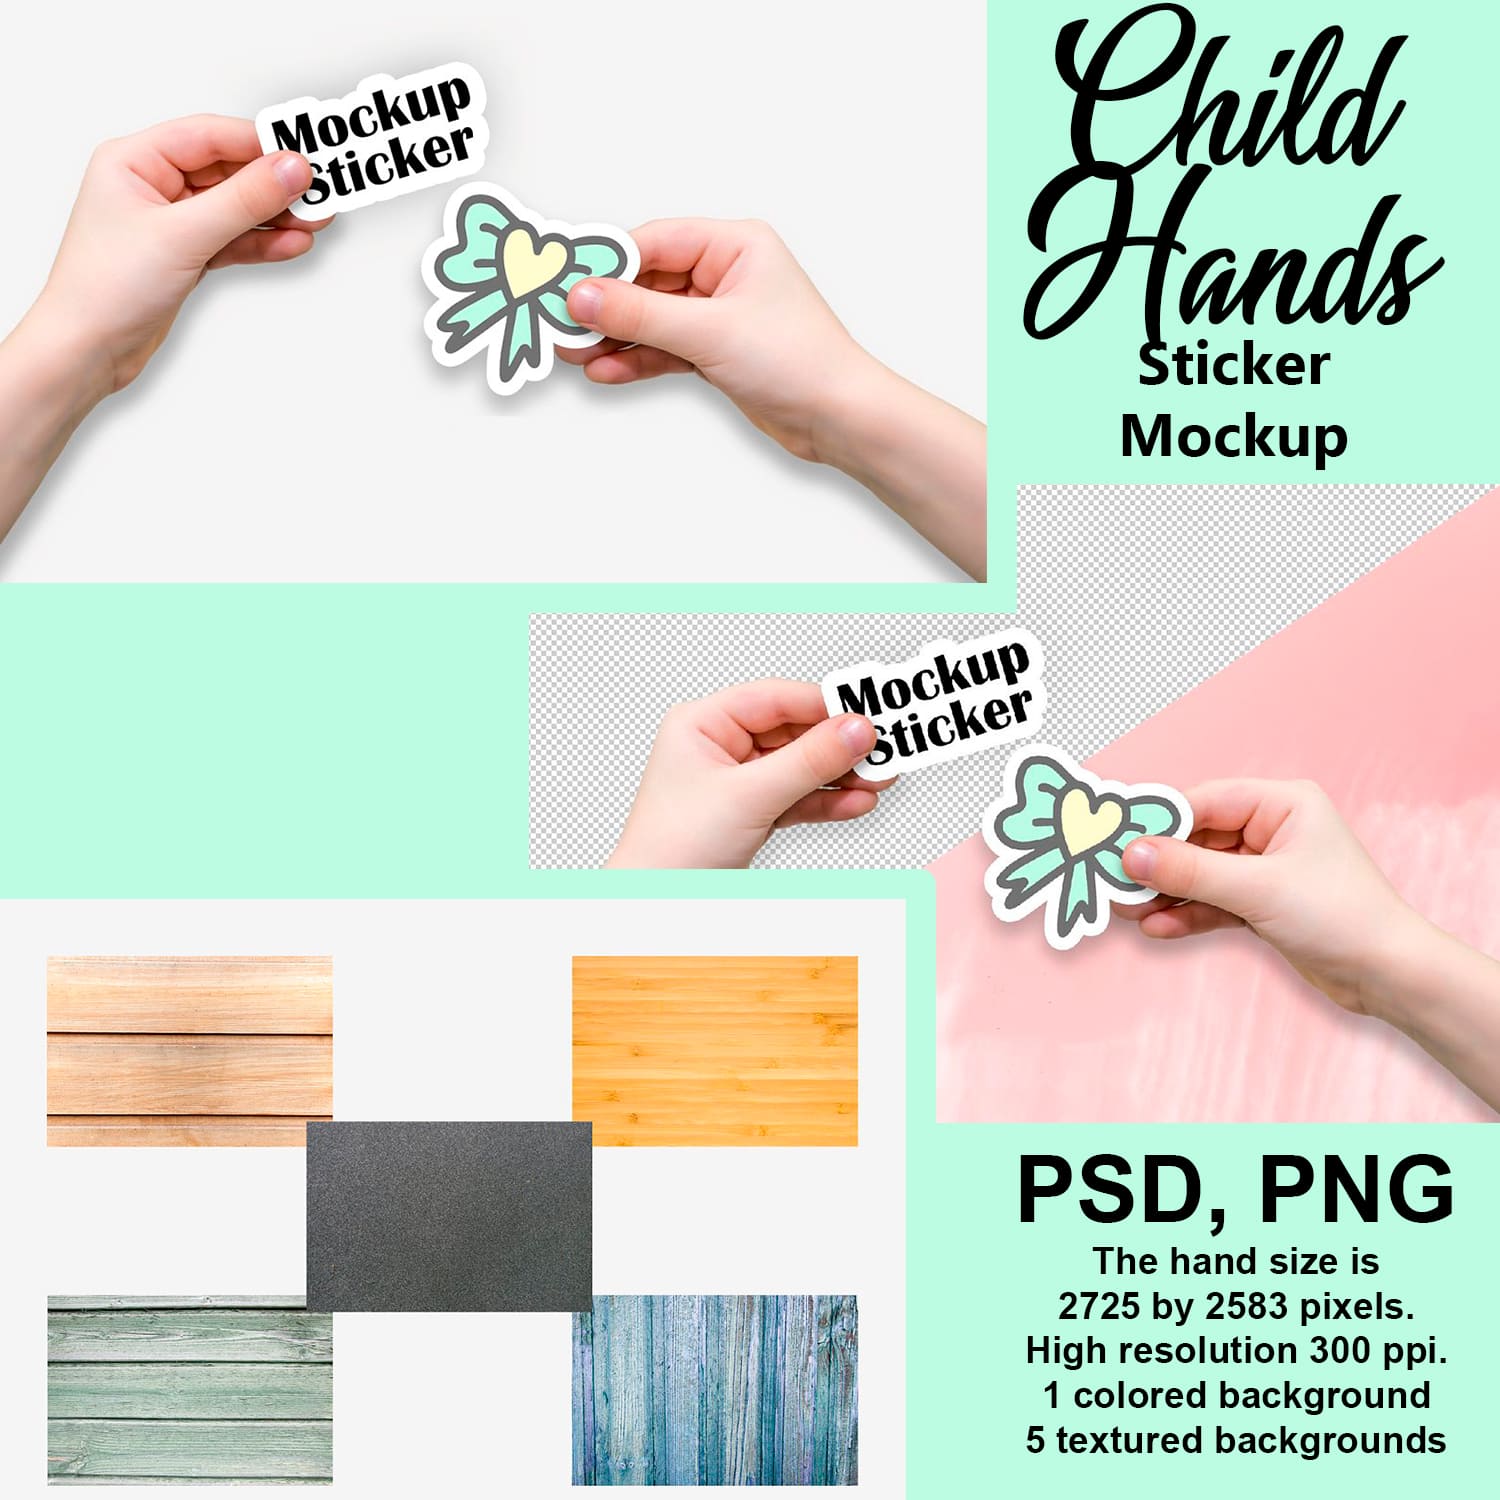 Collection of images of charming stickers in the form of a child's hand.